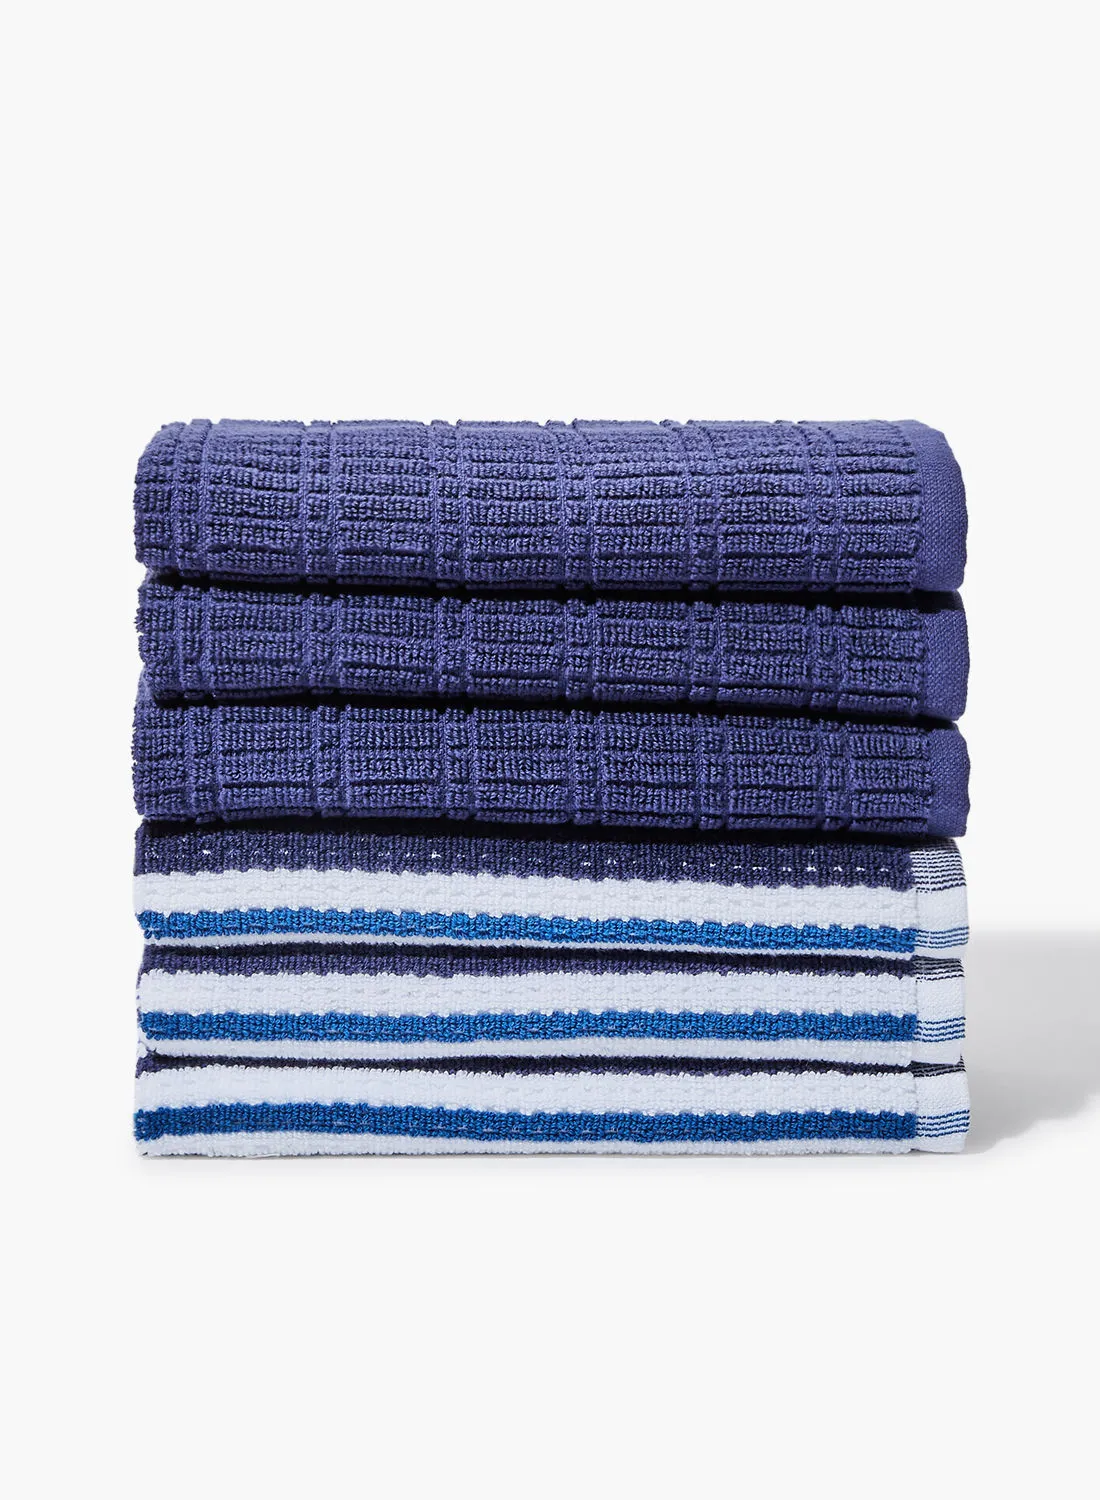 Amal 6 Set Bathroom Towel Set - 393 GSM 100% Cotton Solid And Yarn Dyed - Blue Color -Quick Dry - Super Absorbent